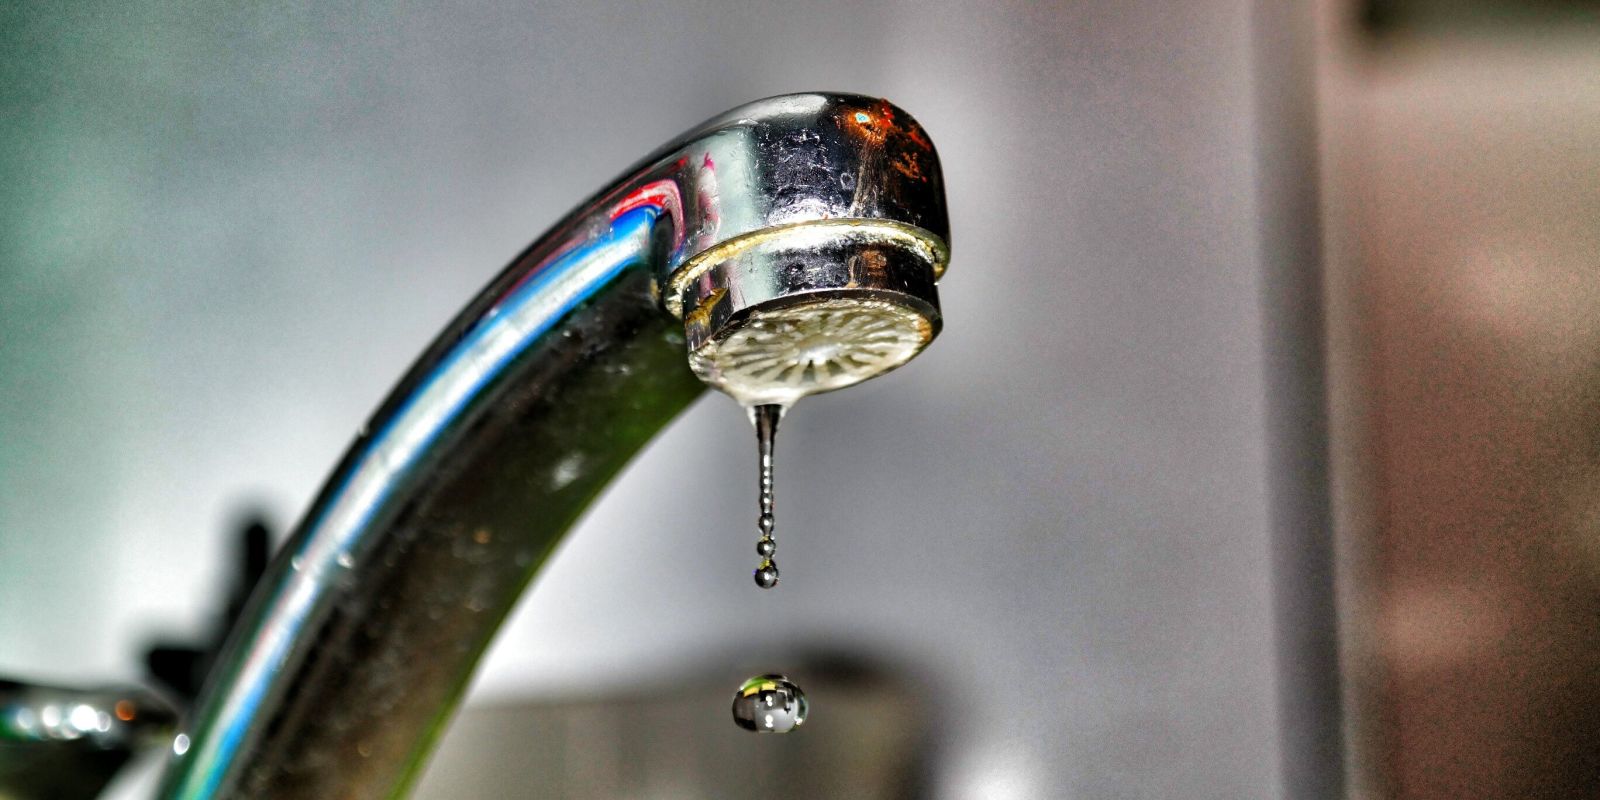 How to Fix a Leaking Tap Without Getting Professional Help